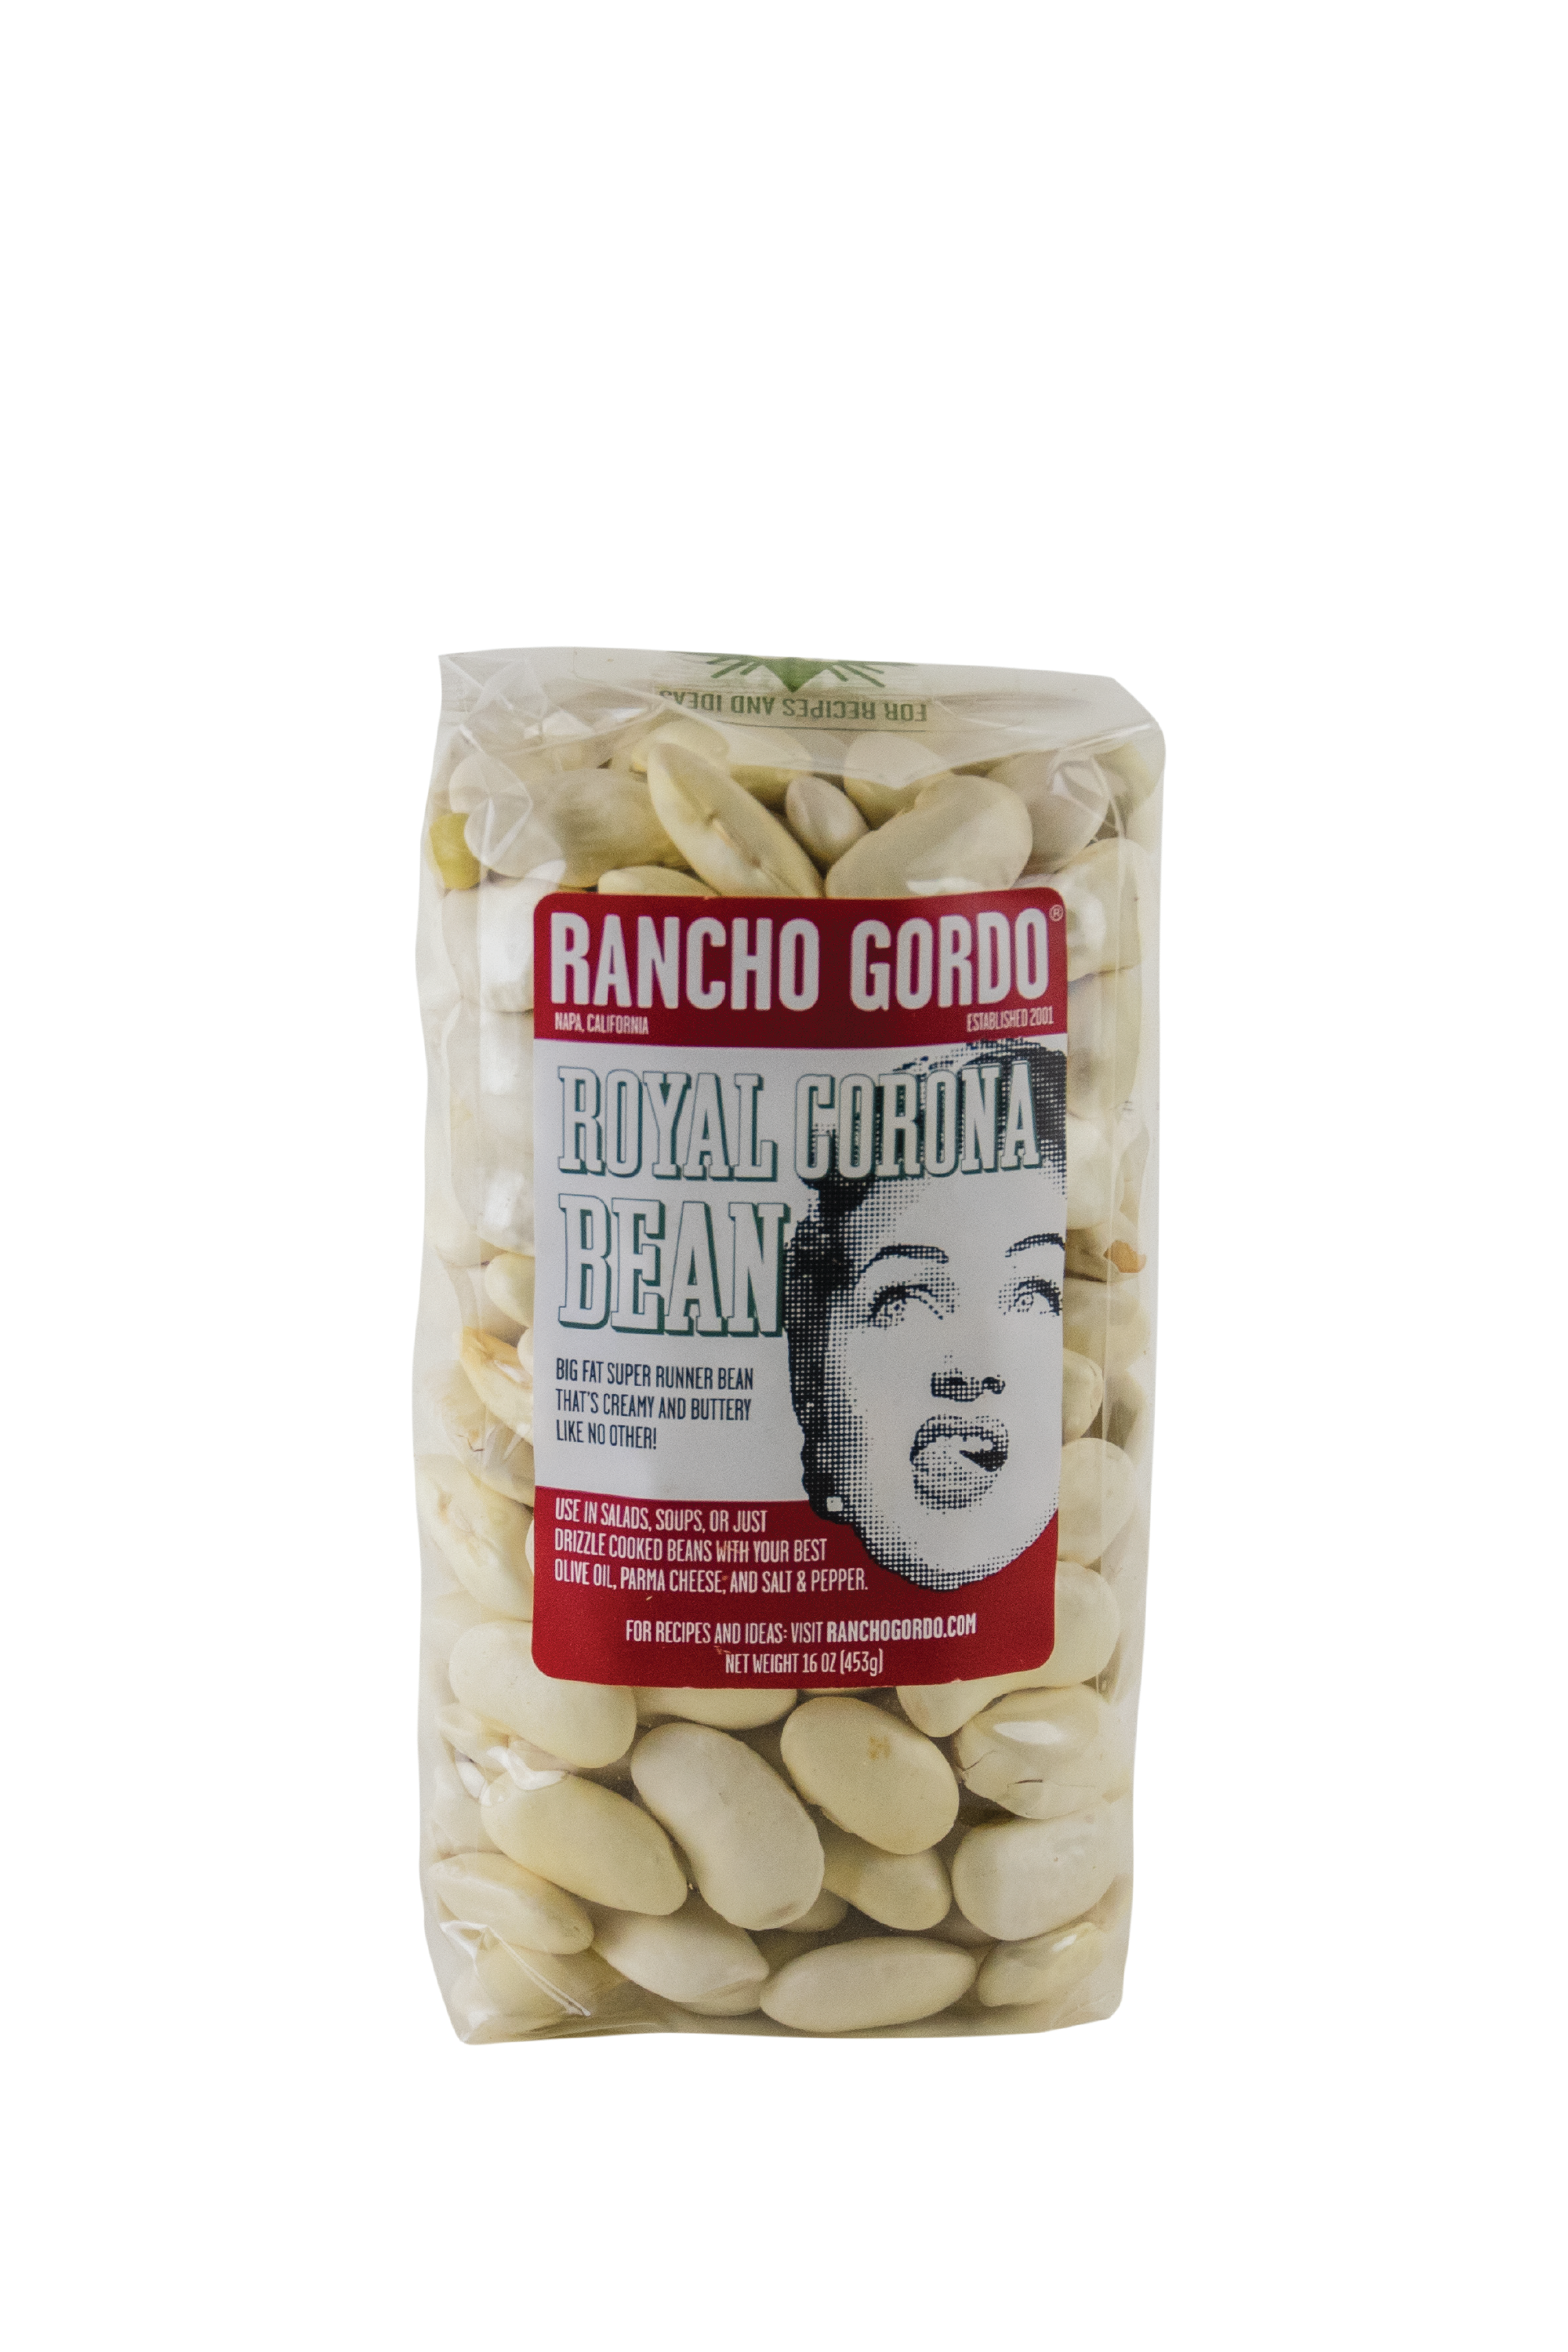 A One Pound Bag Of Rancho Gordo Royal Corona beans on a white background. Red and white label with an image of the face of a woman licking her upper lip. Additional text on bag reads: Big fat runner bean that's creamy and buttery like no other! Use in salads, soups, or just drizzle cooked beans with your best olive oil, Parma cheese, and salt & pepper.